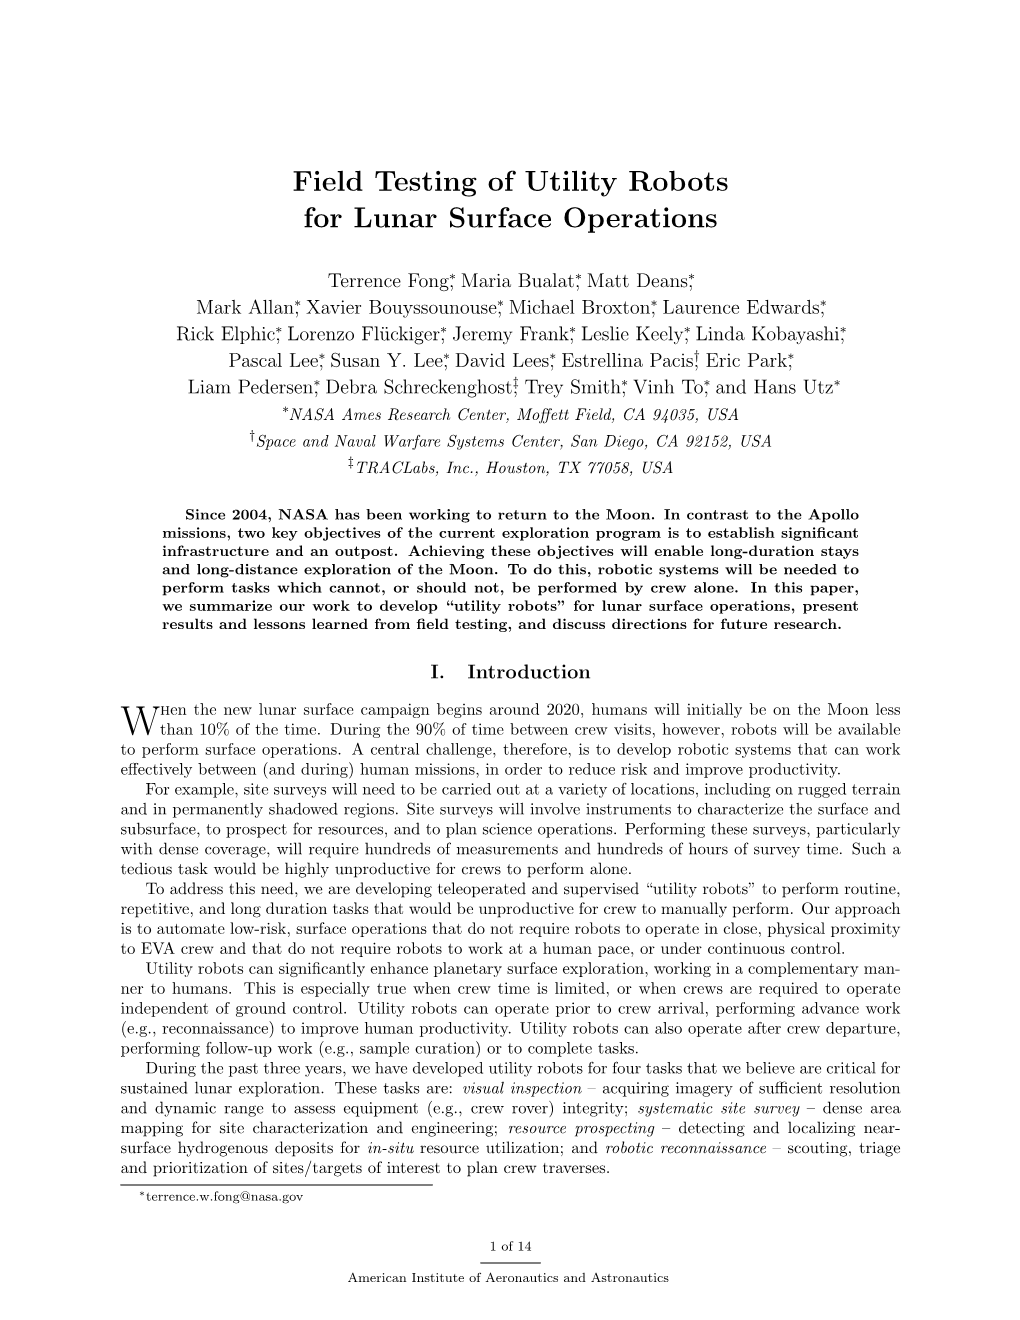 Field Testing of Utility Robots for Lunar Surface Operations